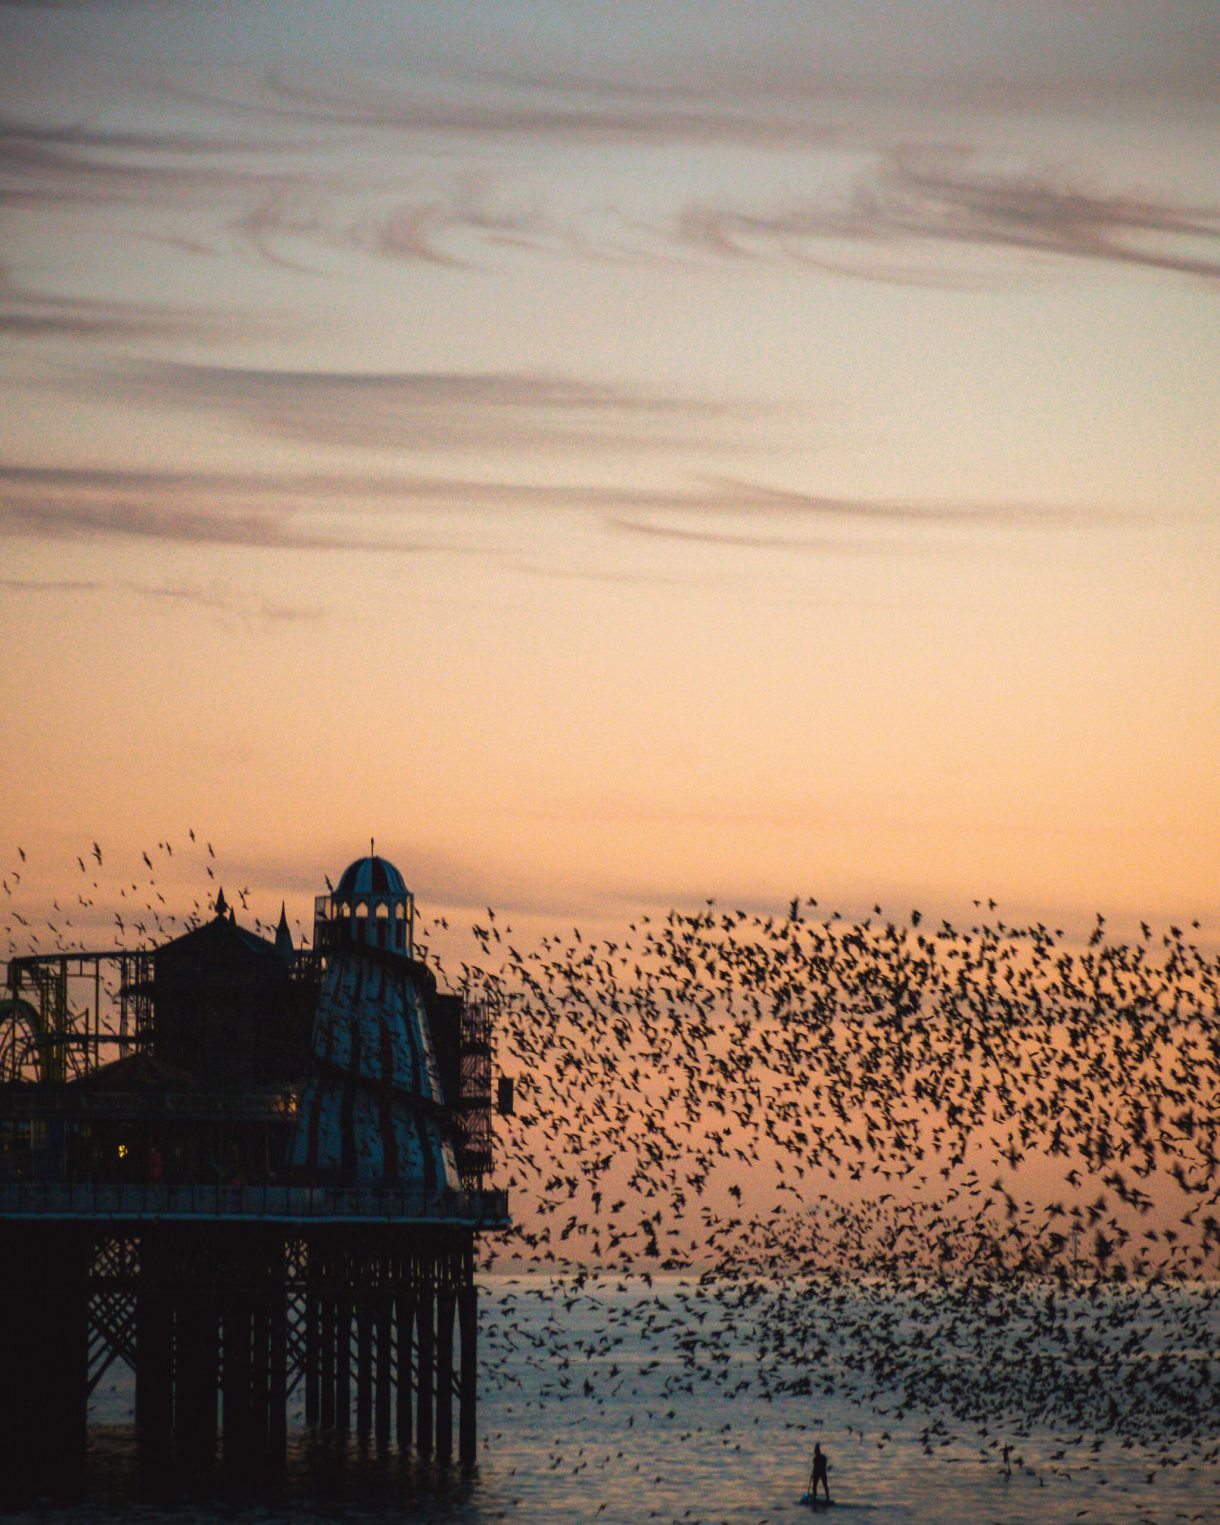 The sun sets behind a burned old pier. Birds flock in the foreground.